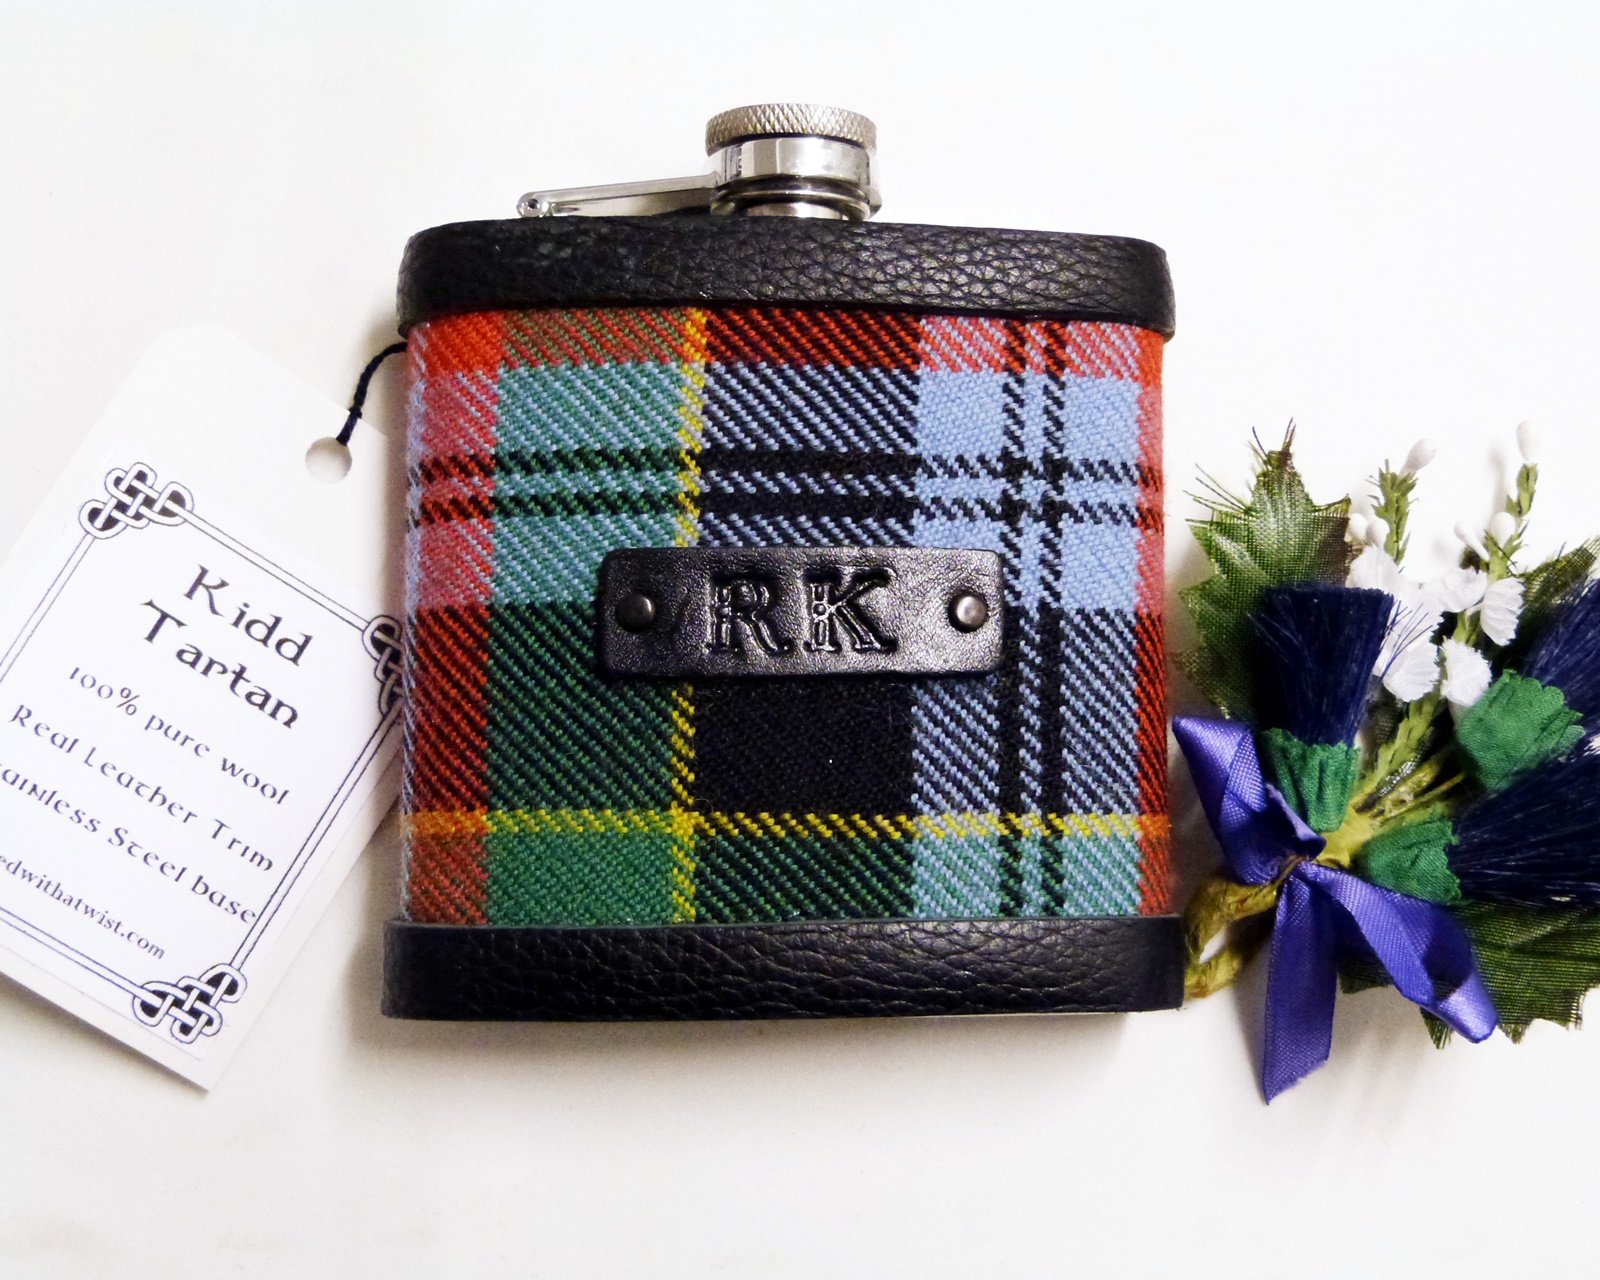 Your Wedding kilt tartan Hip Flasks  with initials embossed on leather labels for Best Man,  Father of Bride or groomsmen, Scottish luxury gift sets of 3-6